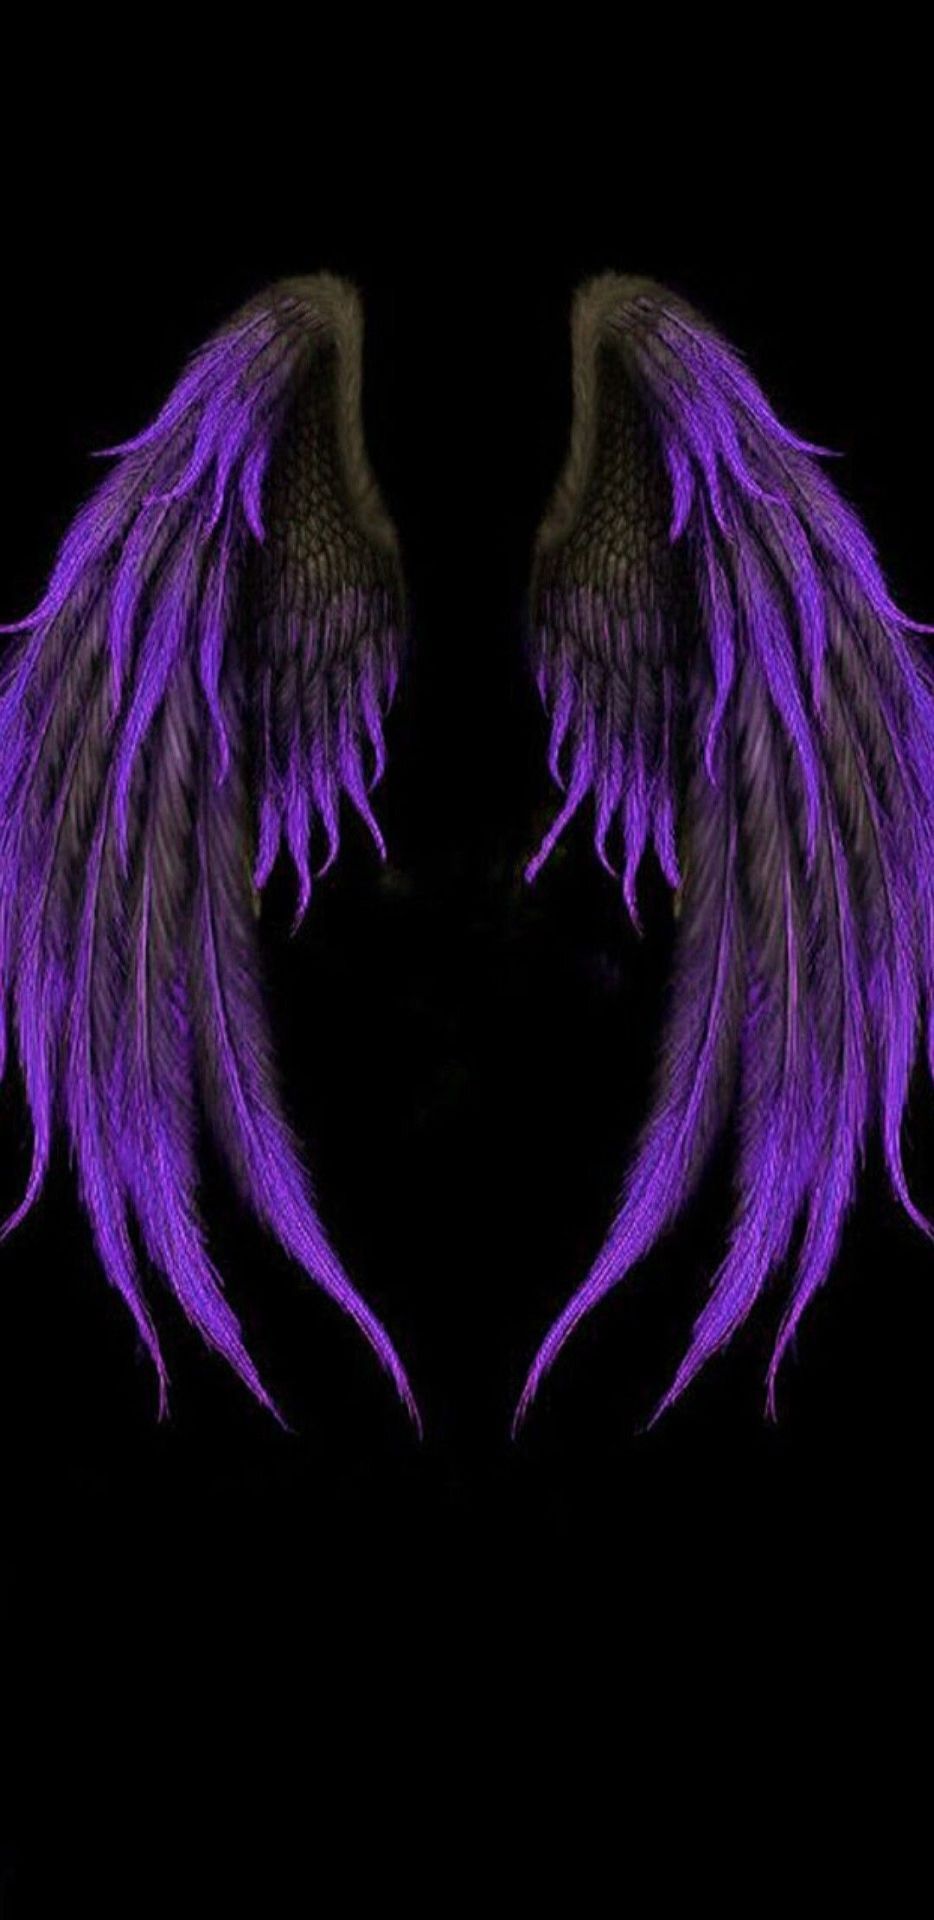 Two purple wings on a black background - Wings